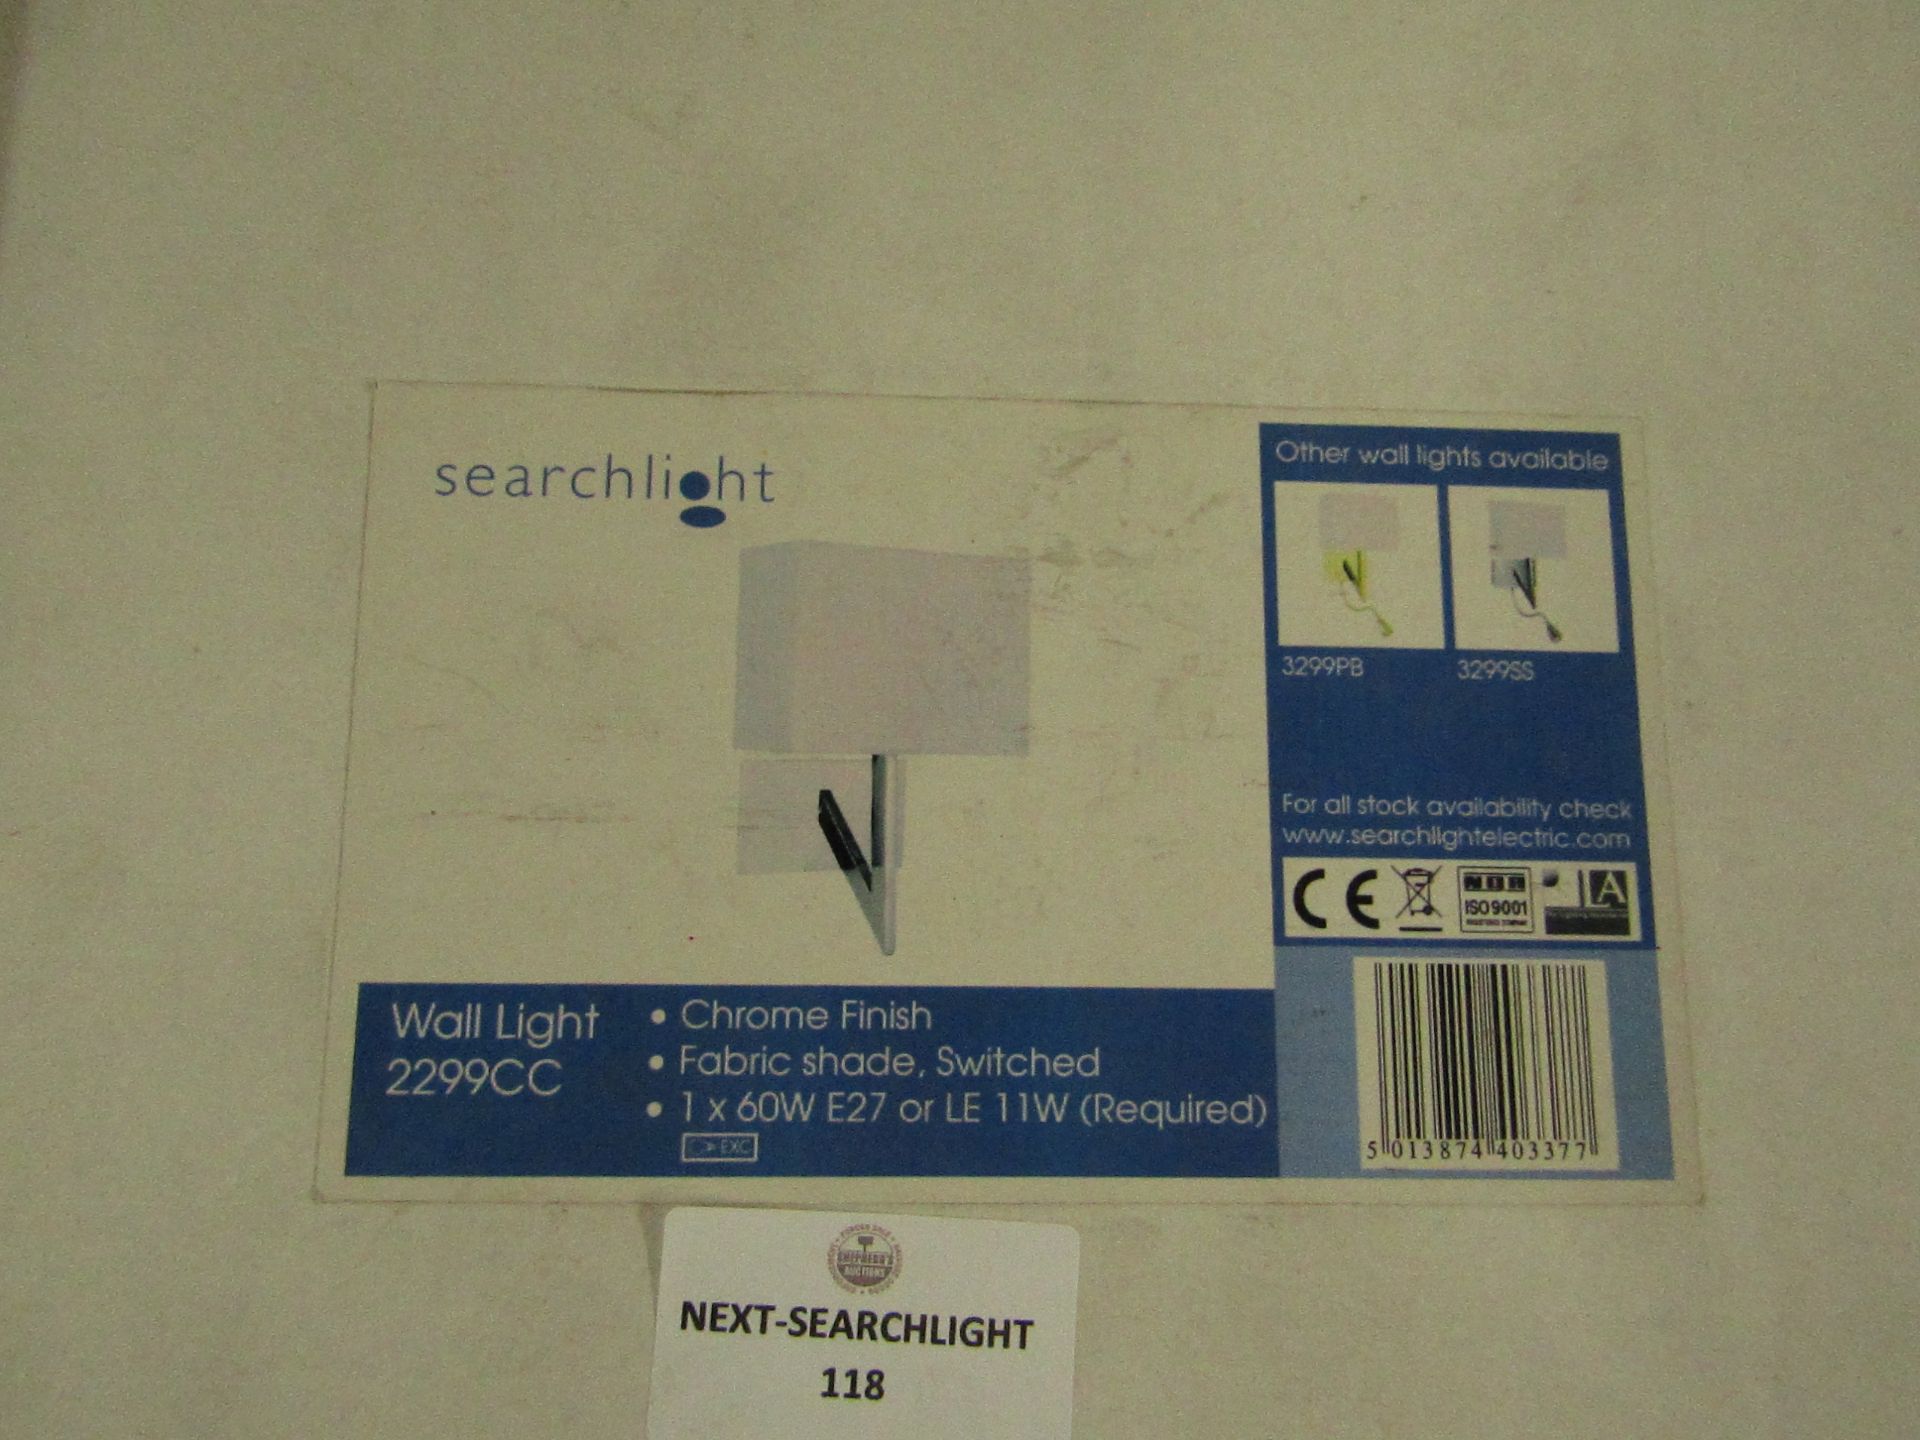 Searchlight Lighting Product RRP ô?55.00 (PLT 3plt) - This lot contains unsorted raw customer - Image 2 of 2